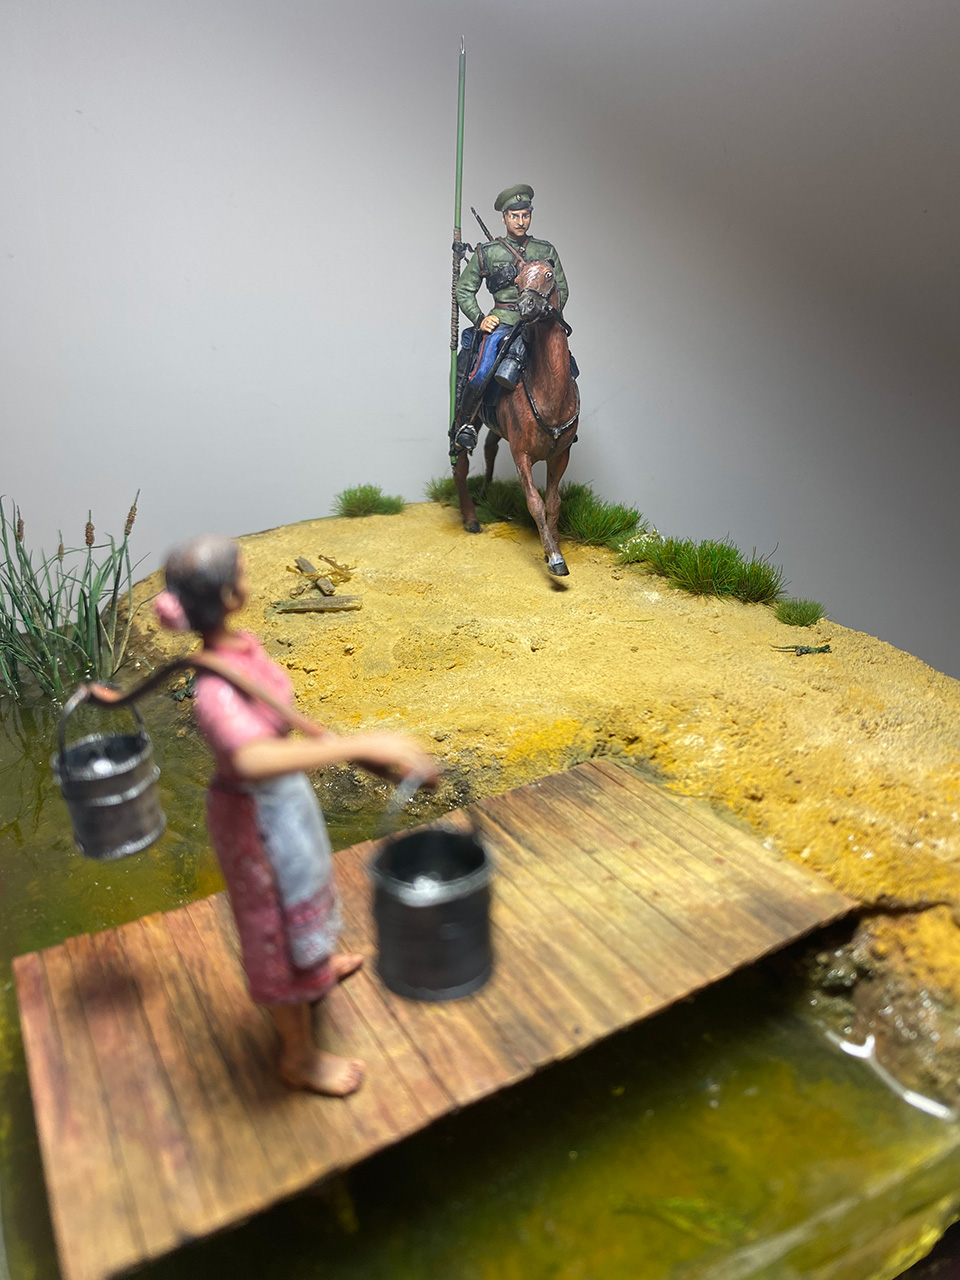 Dioramas and Vignettes: And Quiet Flows the Don, photo #3